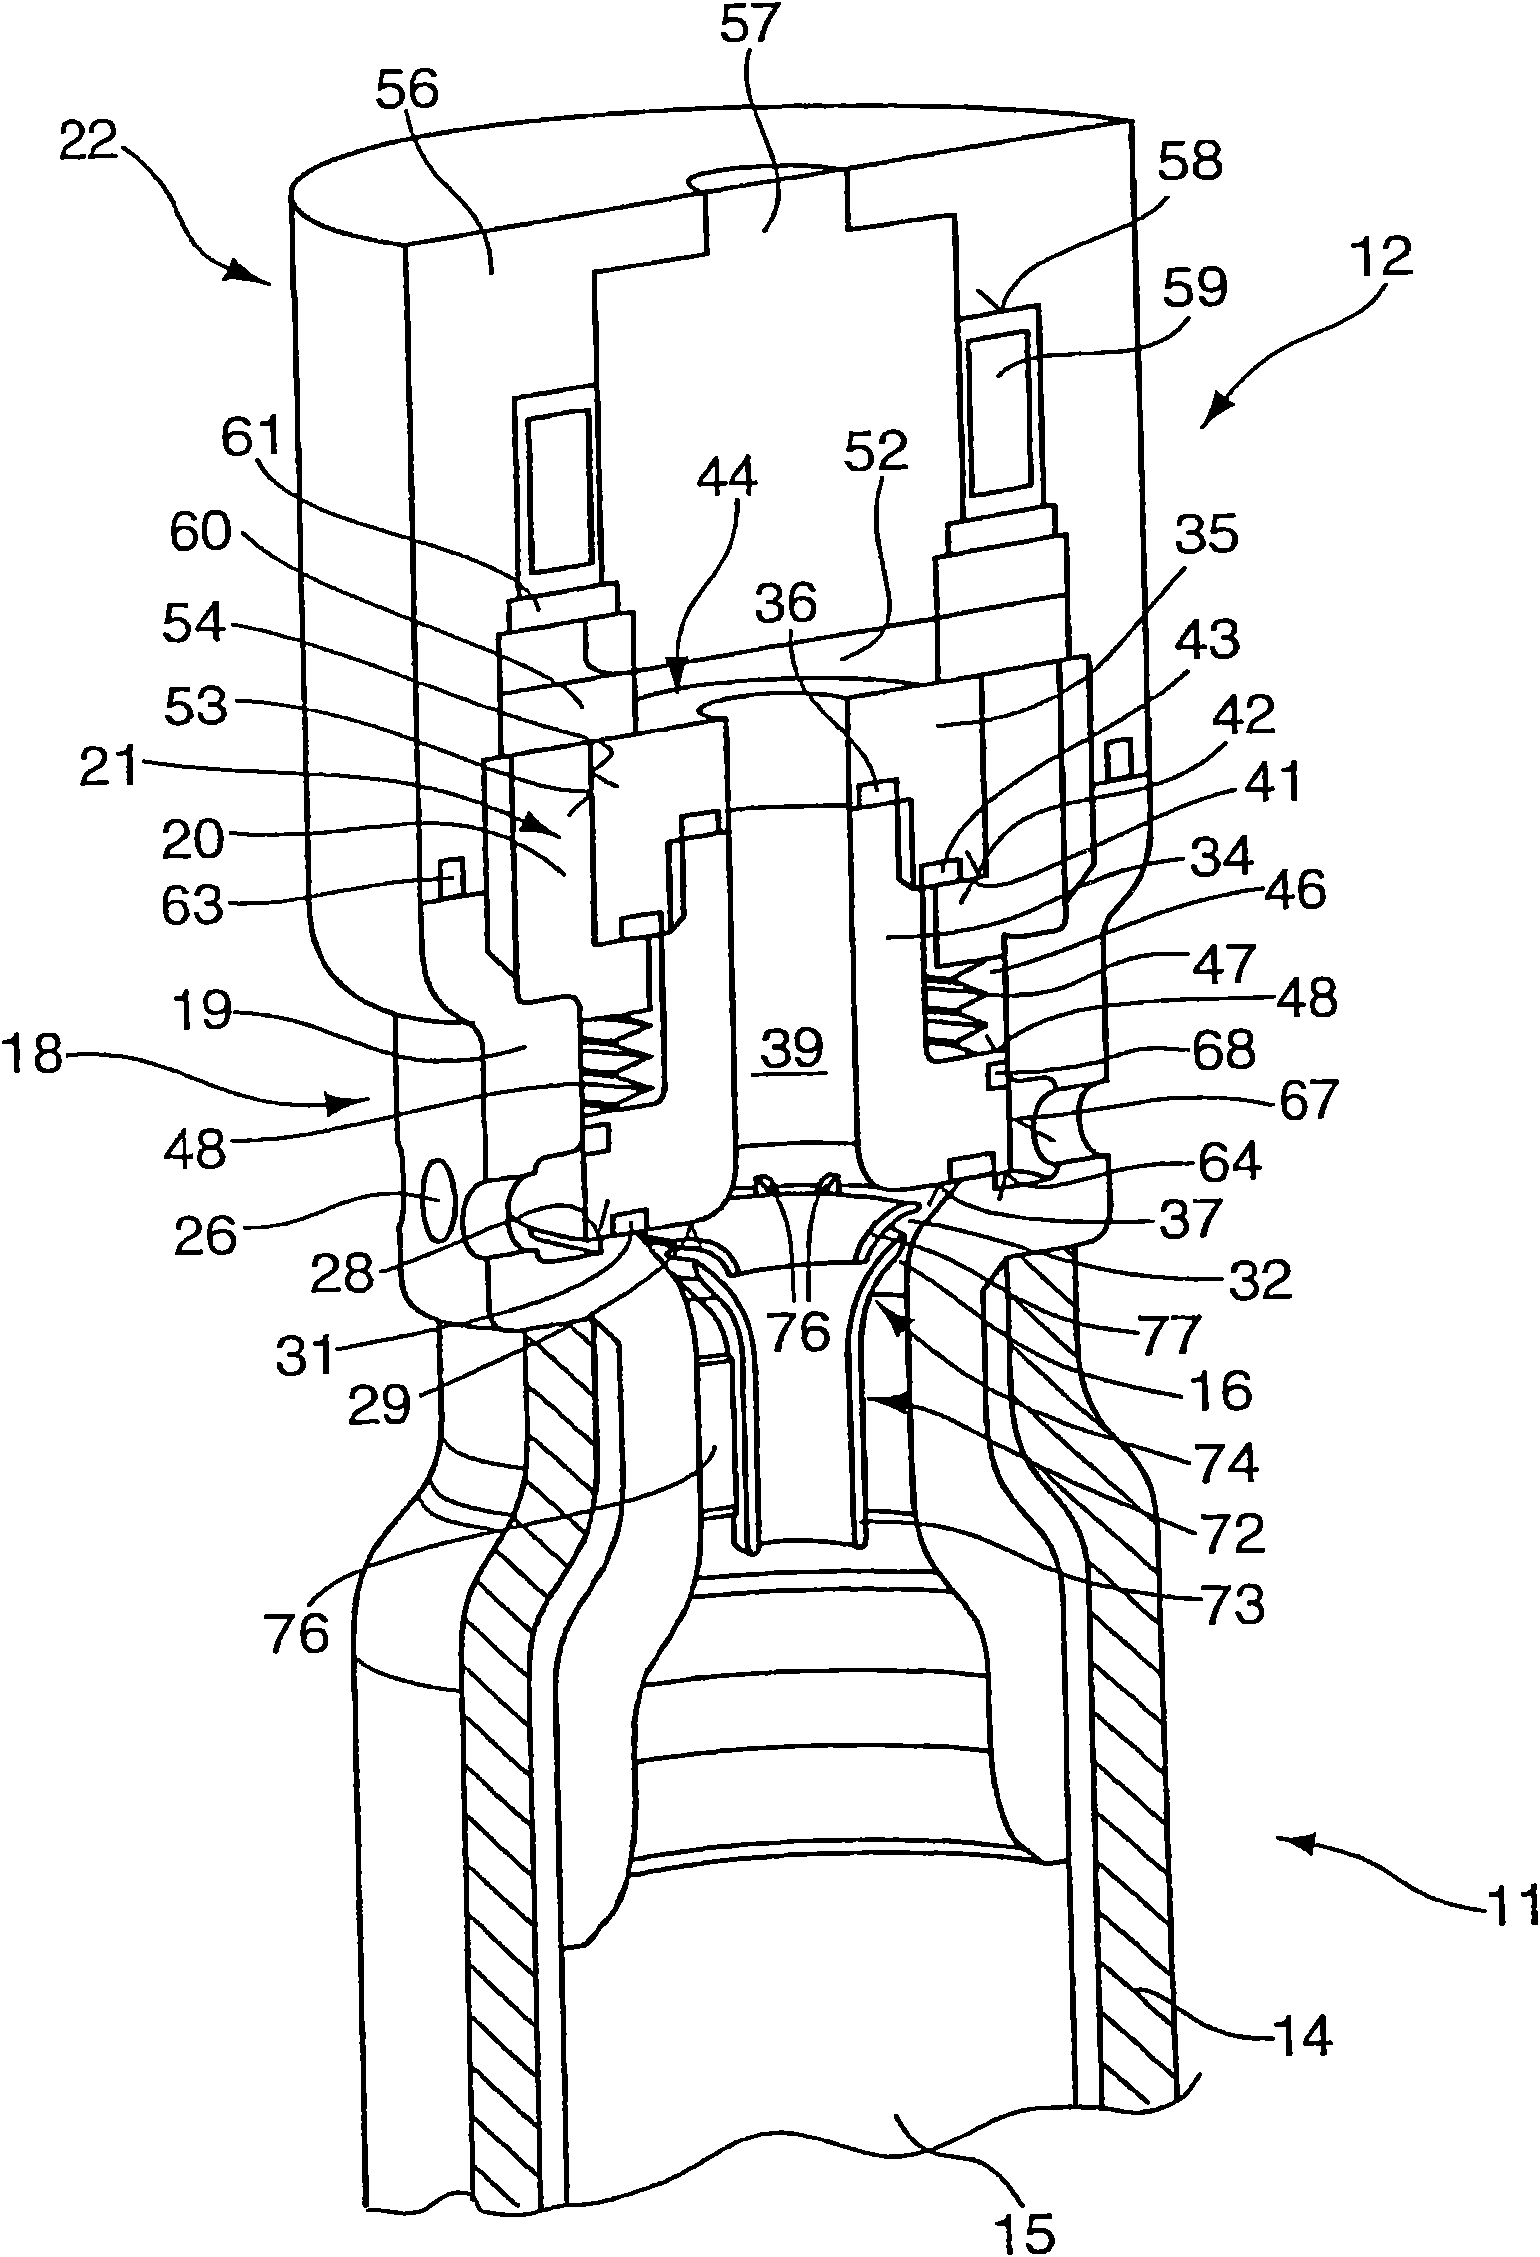 Closure device for a pressure reservoir of a gas-refrigeration generator, which can be filled with a compressed gas